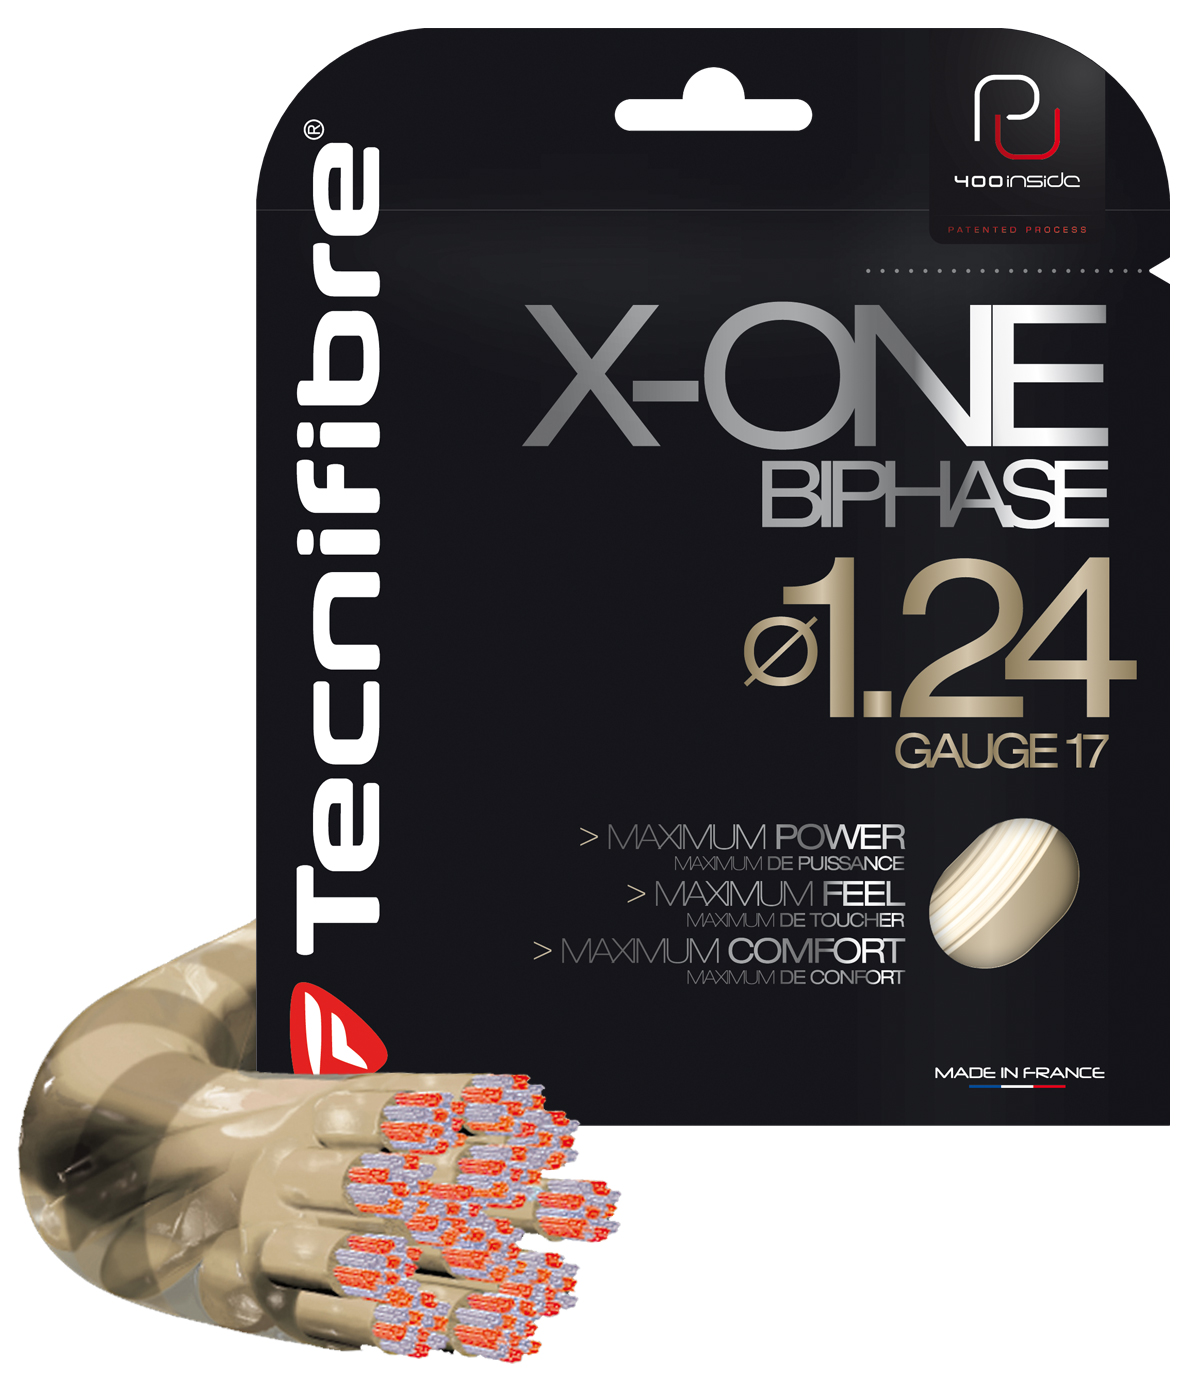 X-One Biphase Tennis String 1.24